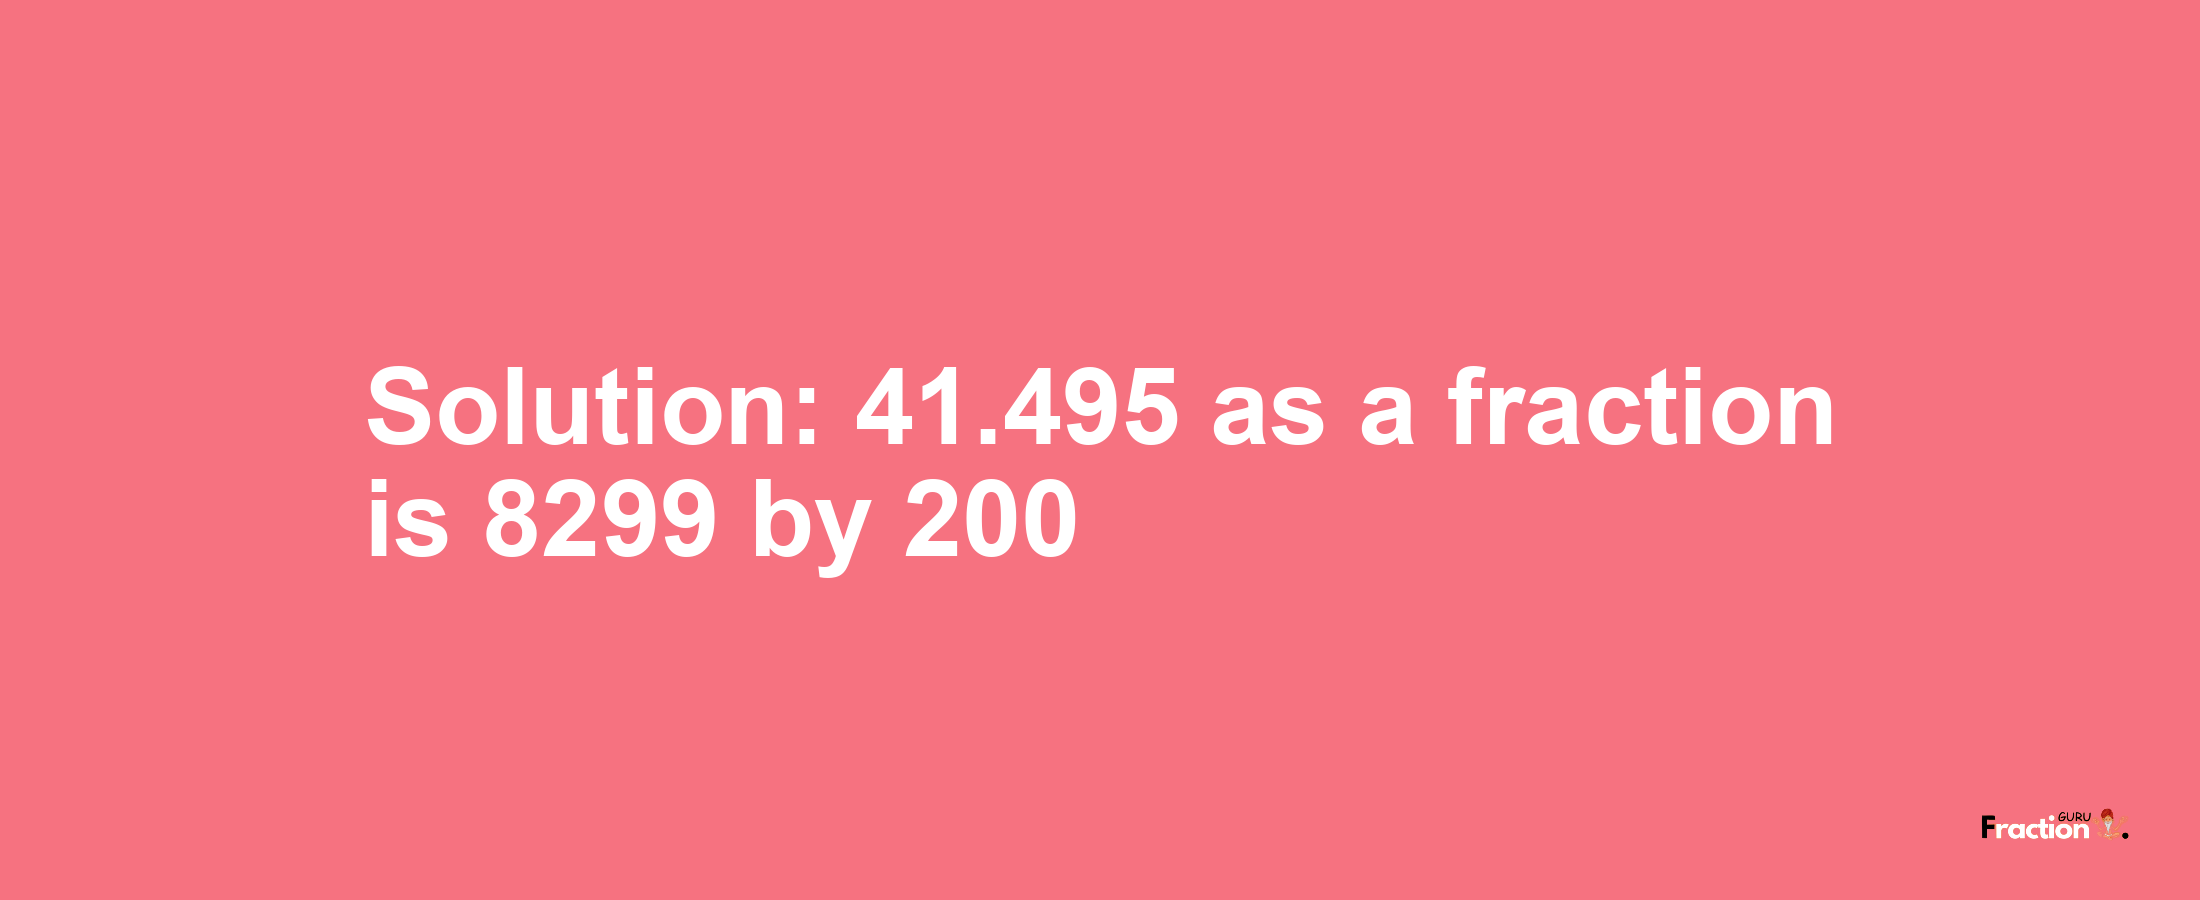 Solution:41.495 as a fraction is 8299/200